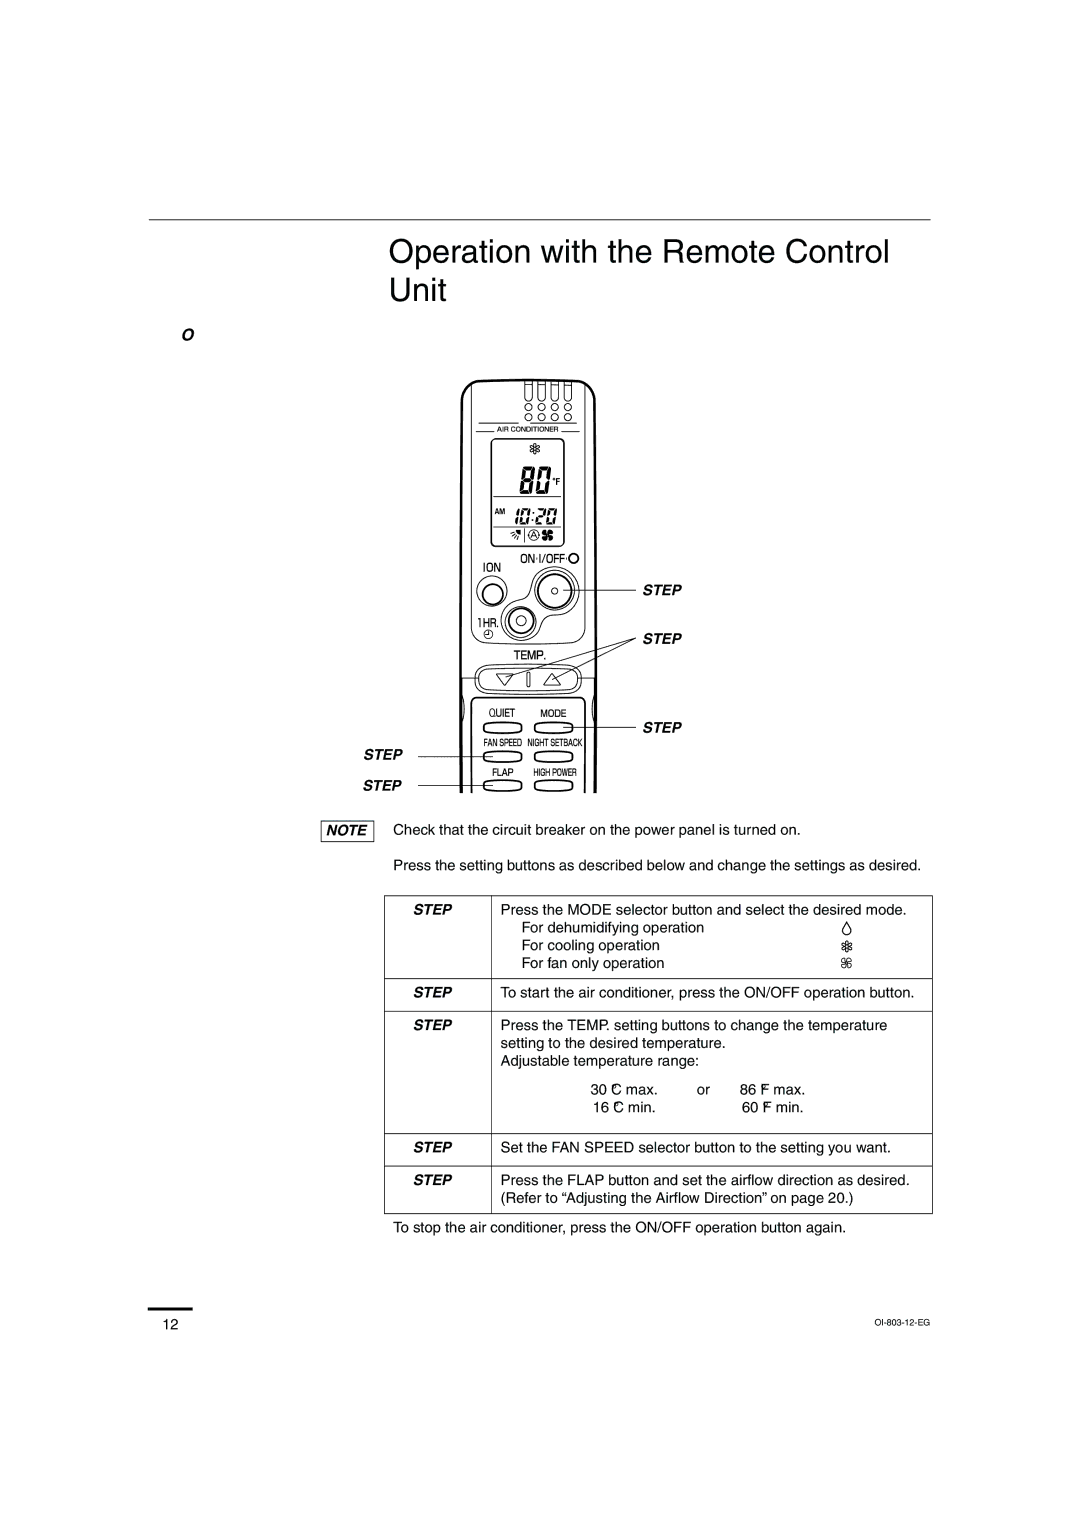 Sanyo KS1271 instruction manual Operation with the Remote Control Unit, Step 